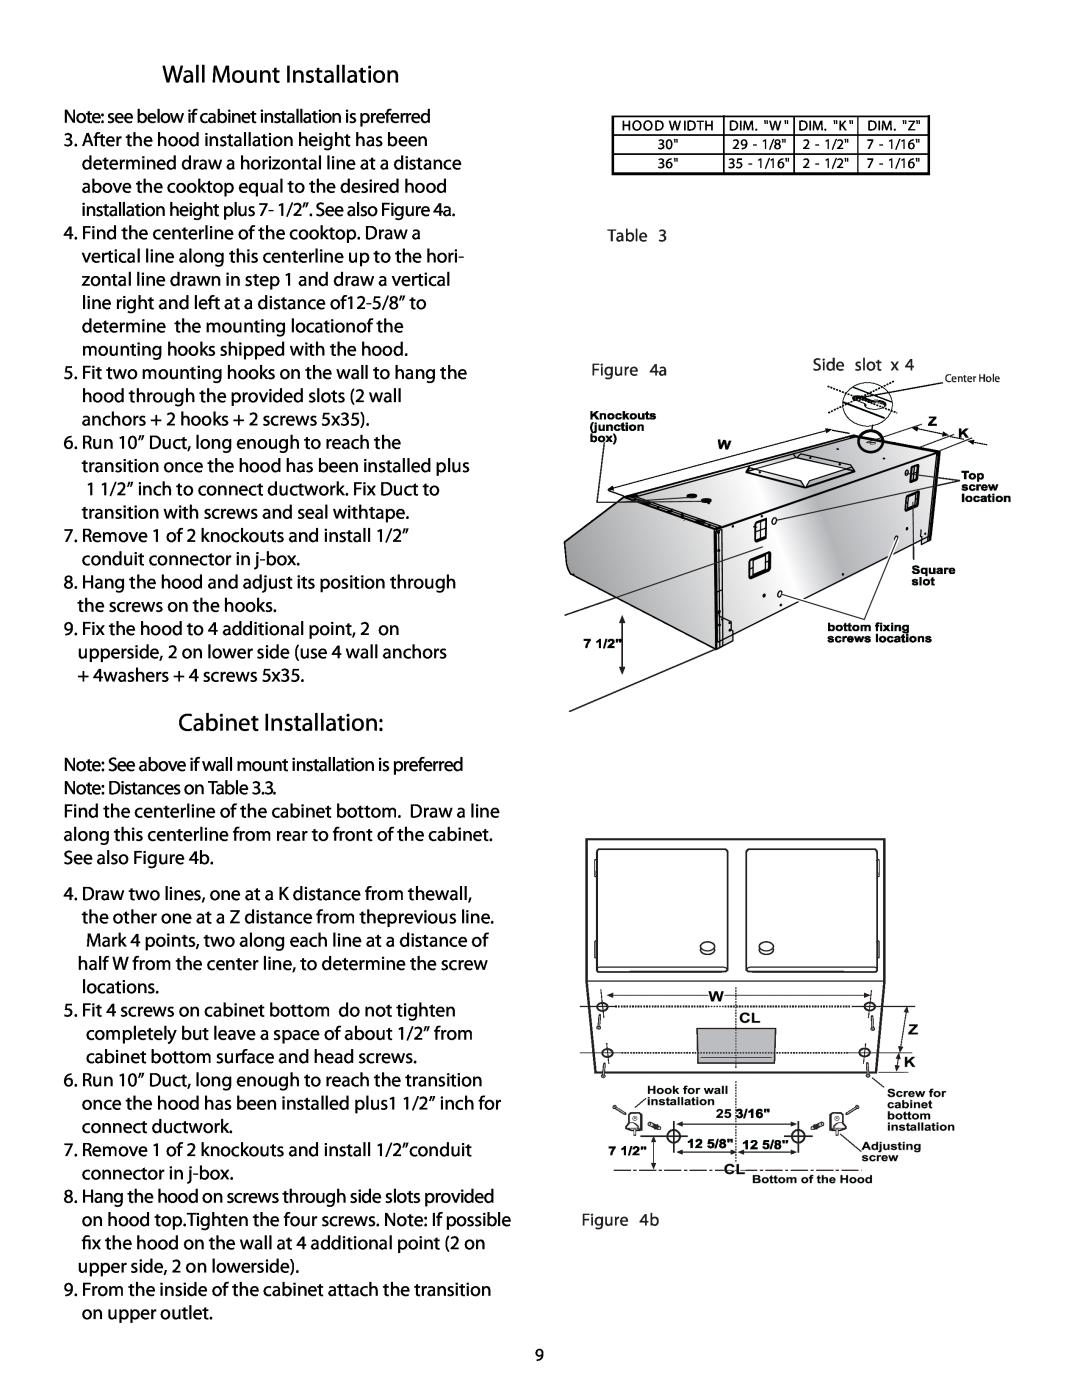 Thermador HMWB30 Wall Mount Installation, Cabinet Installation, Note see below if cabinet installation is preferred 